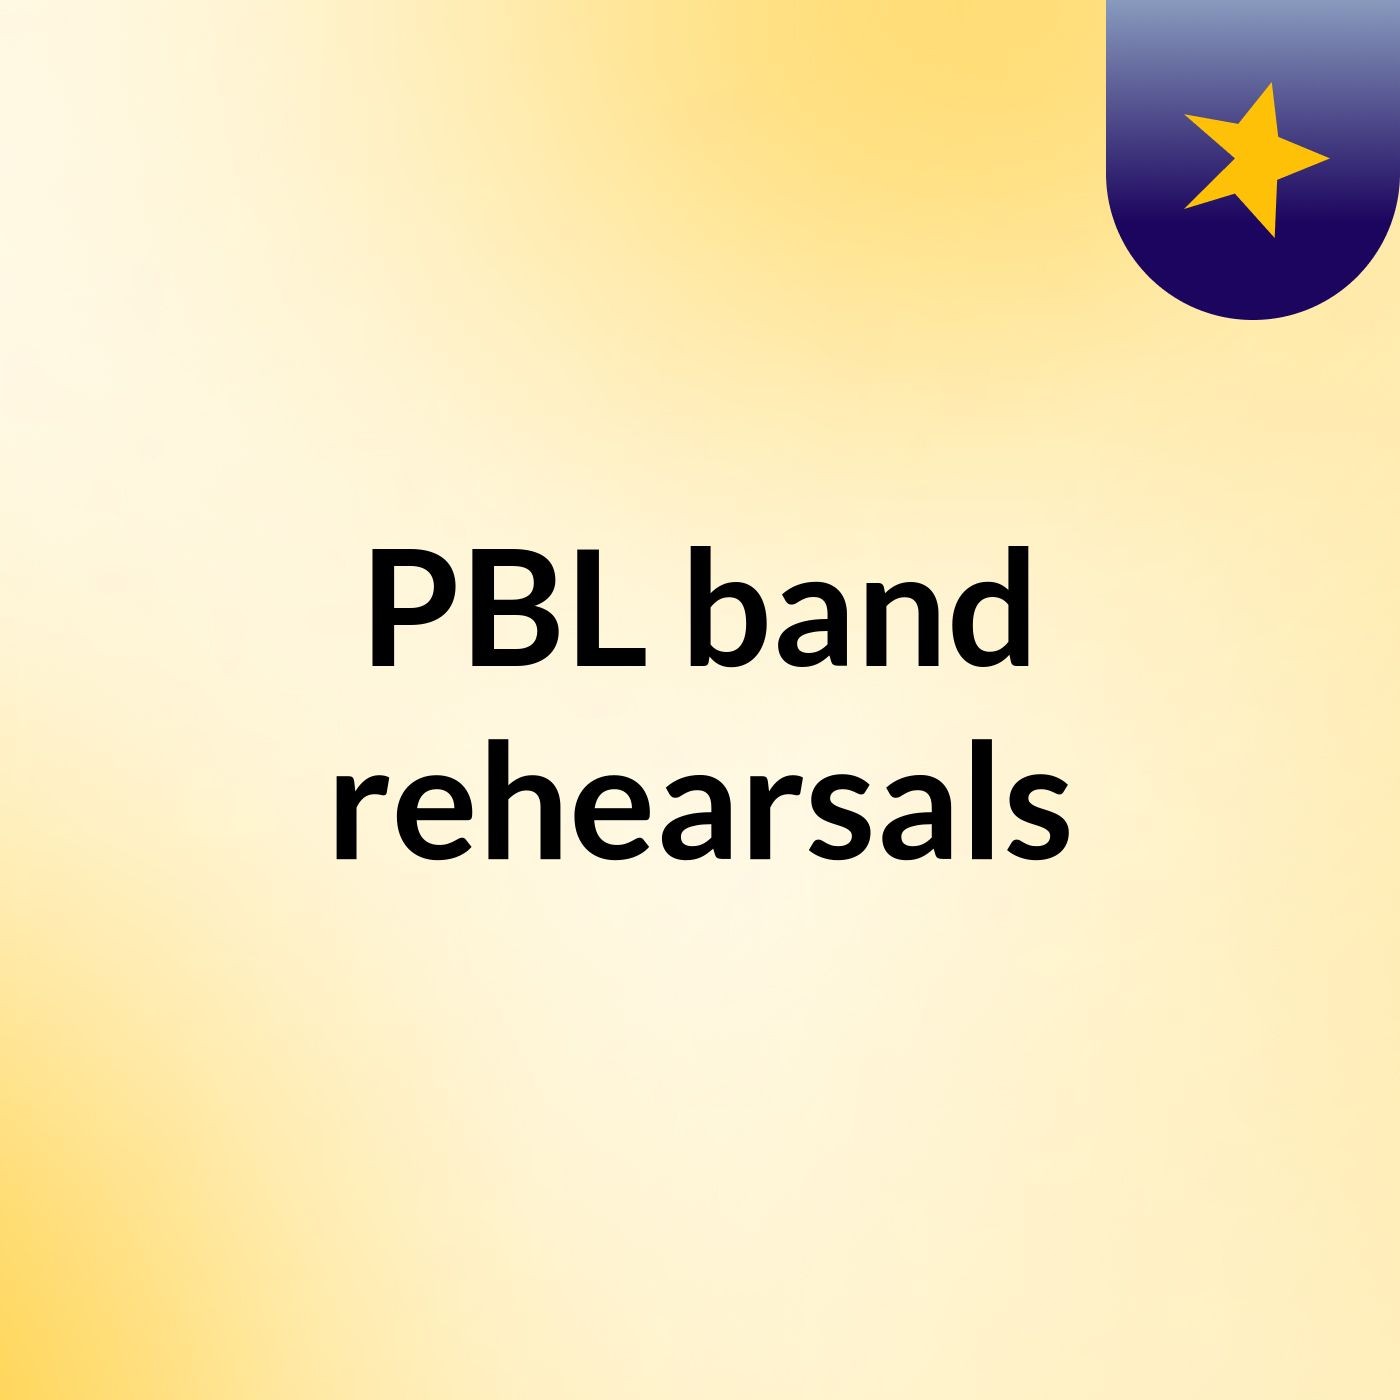 PBL band rehearsals